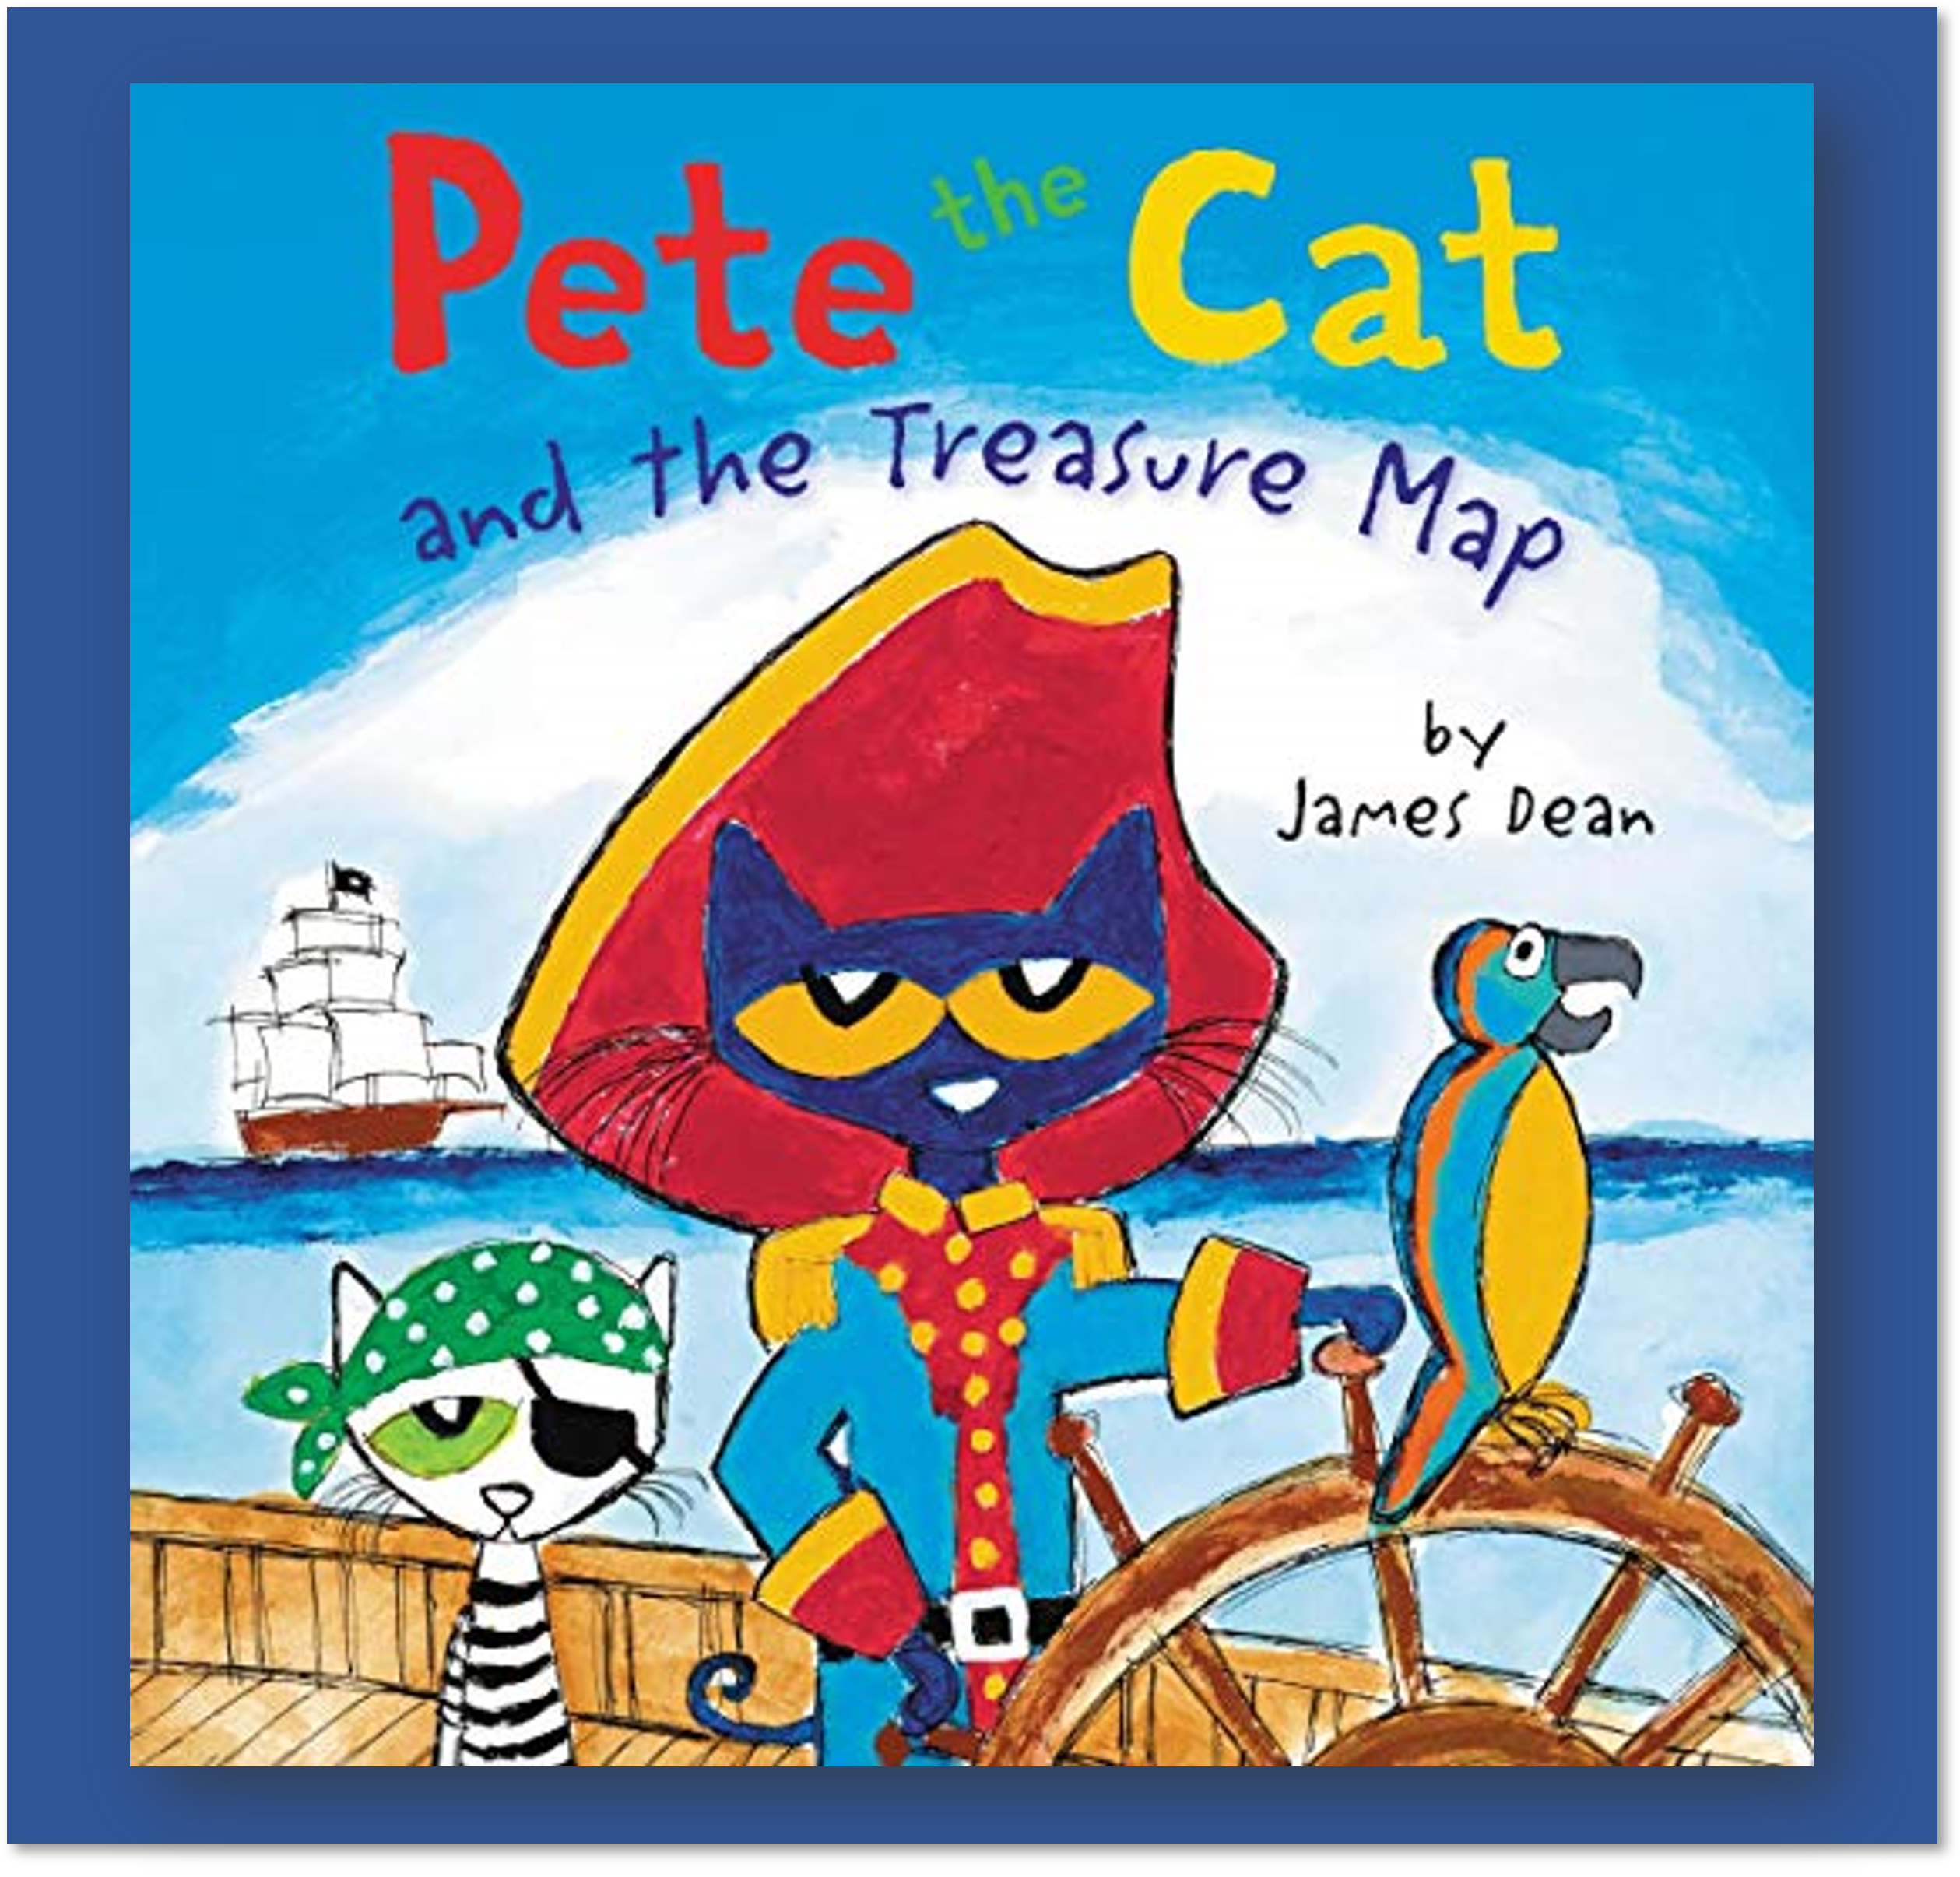 Pete the Cat and the Treasure Map Activities